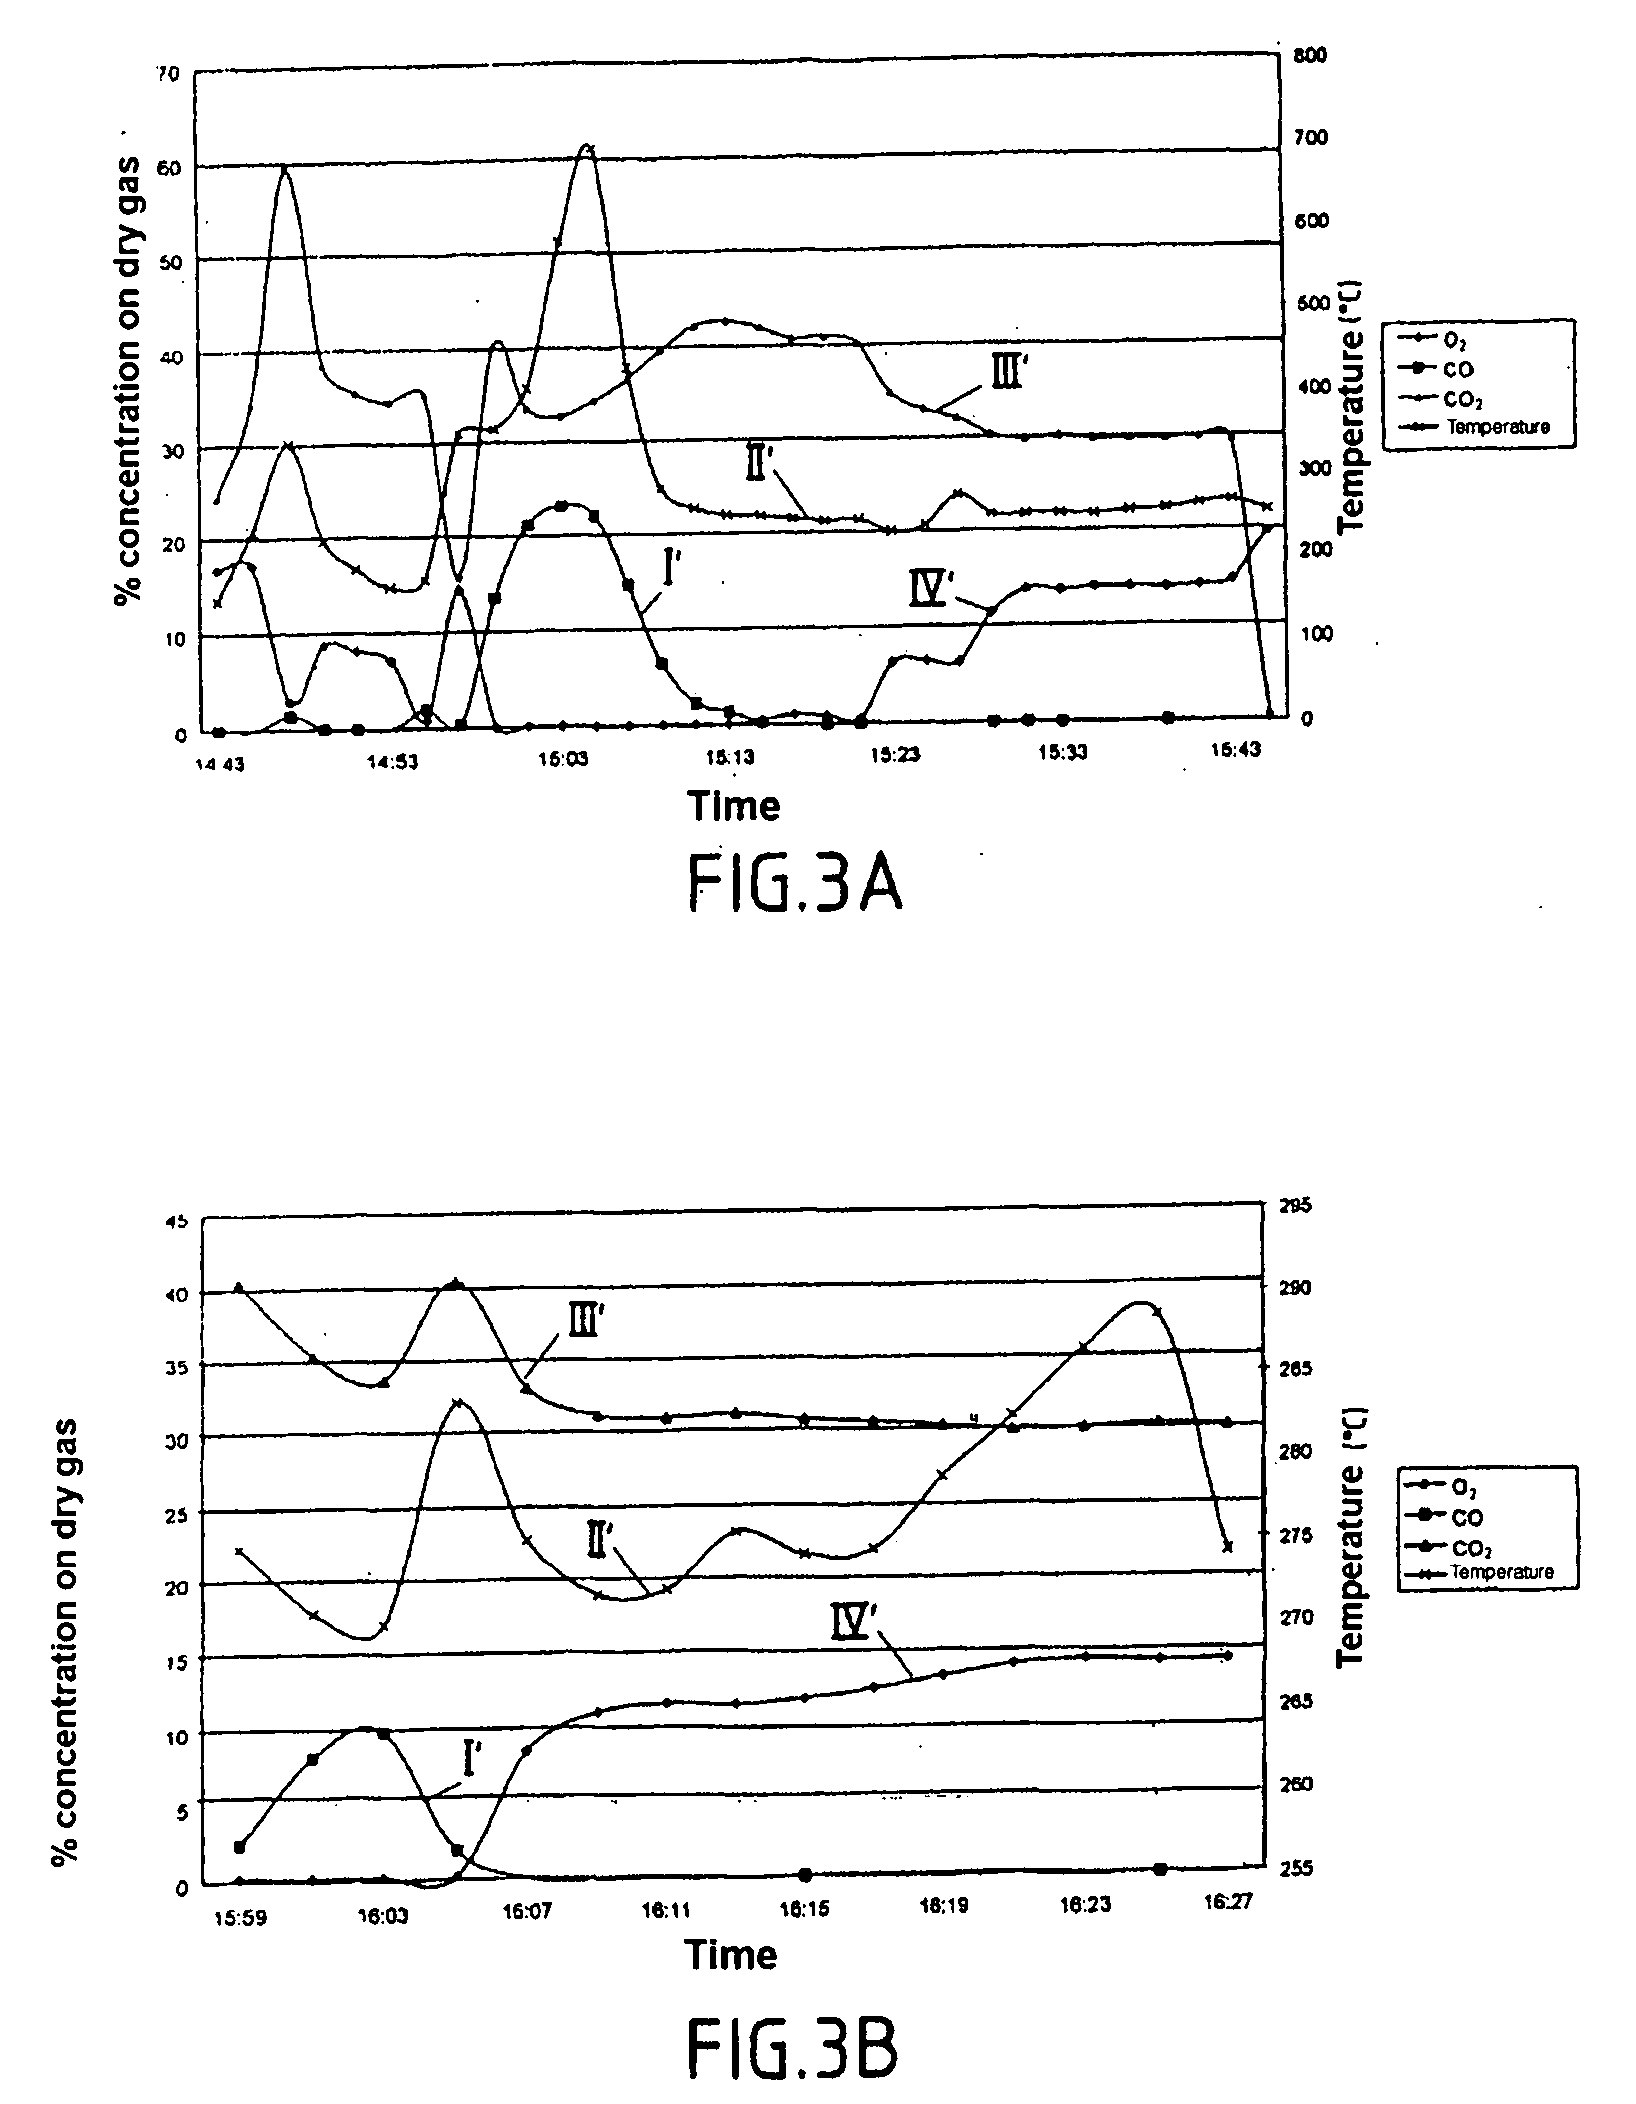 Aluminum melting method using analysis of fumes coming from the furnace